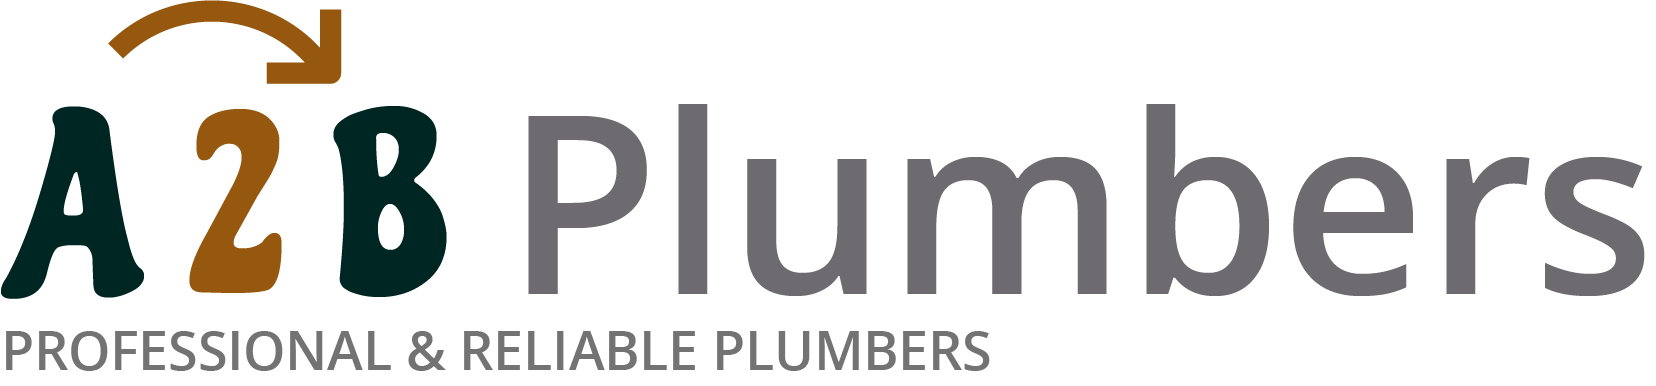 If you need a boiler installed, a radiator repaired or a leaking tap fixed, call us now - we provide services for properties in Penwortham and the local area.